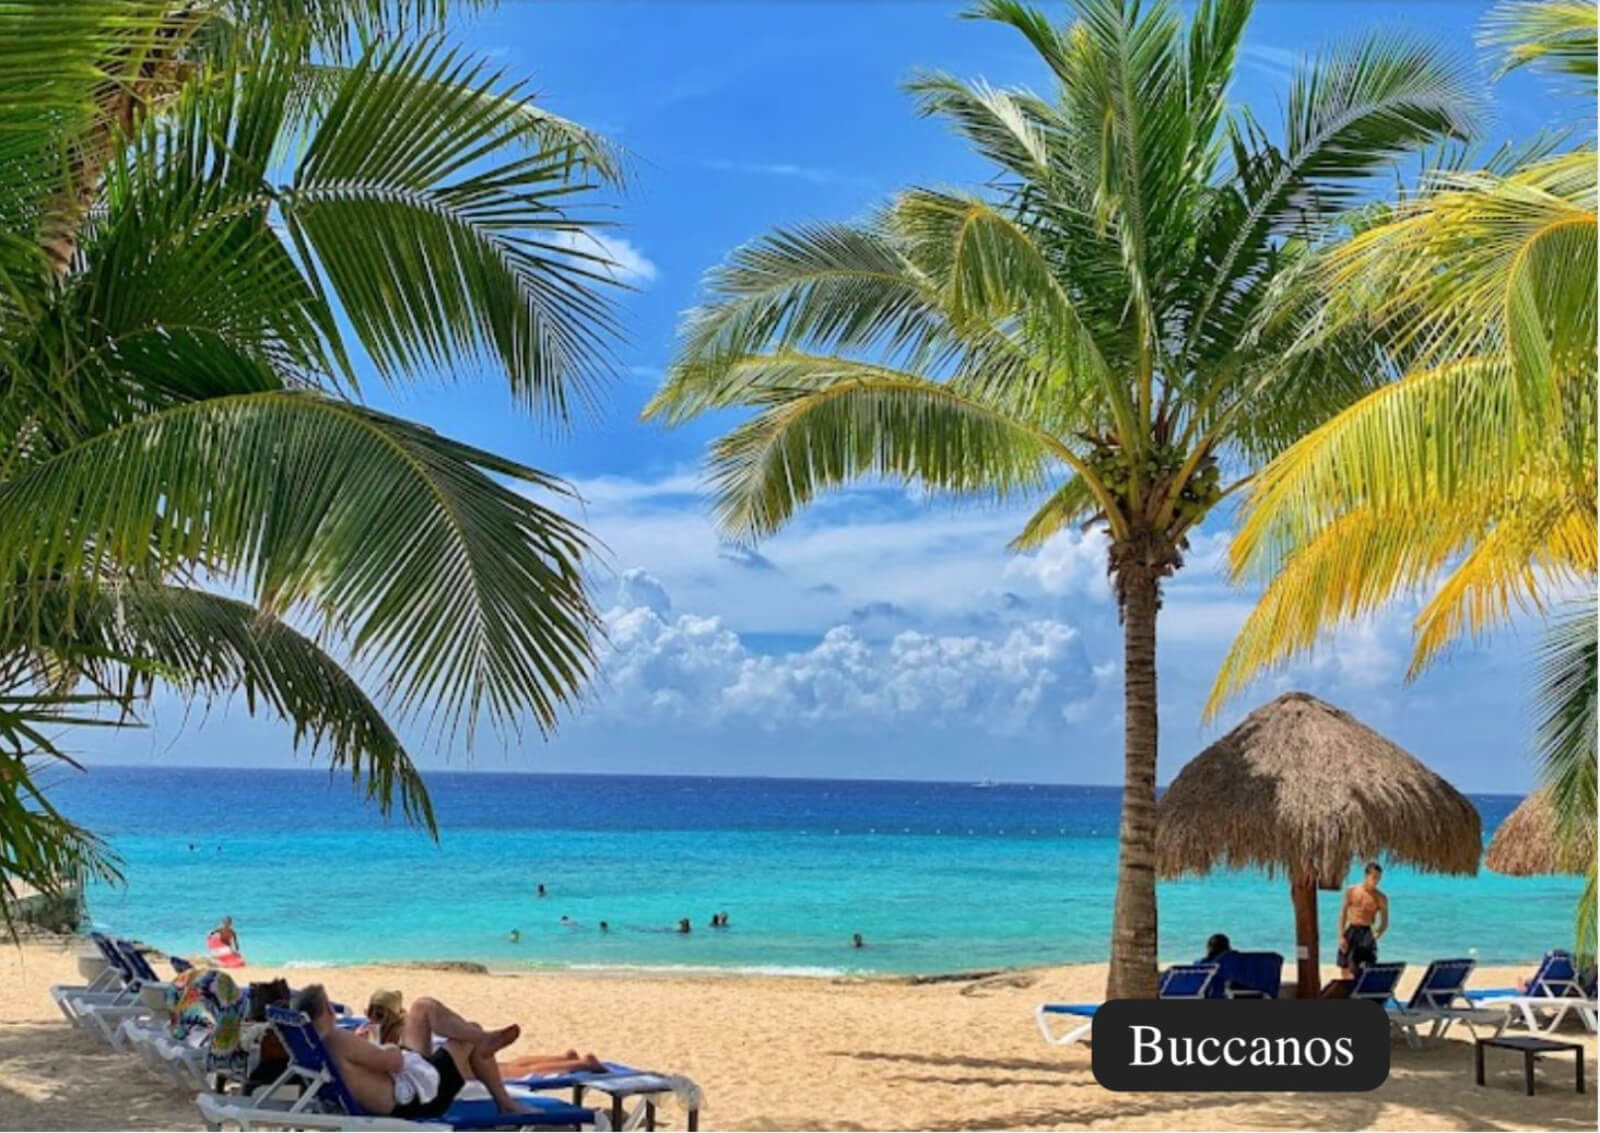 Beachfront condo, hotel services, dock, tennis court, jacuzzi, beach club, room service, concierge and more for sale in Cozumel